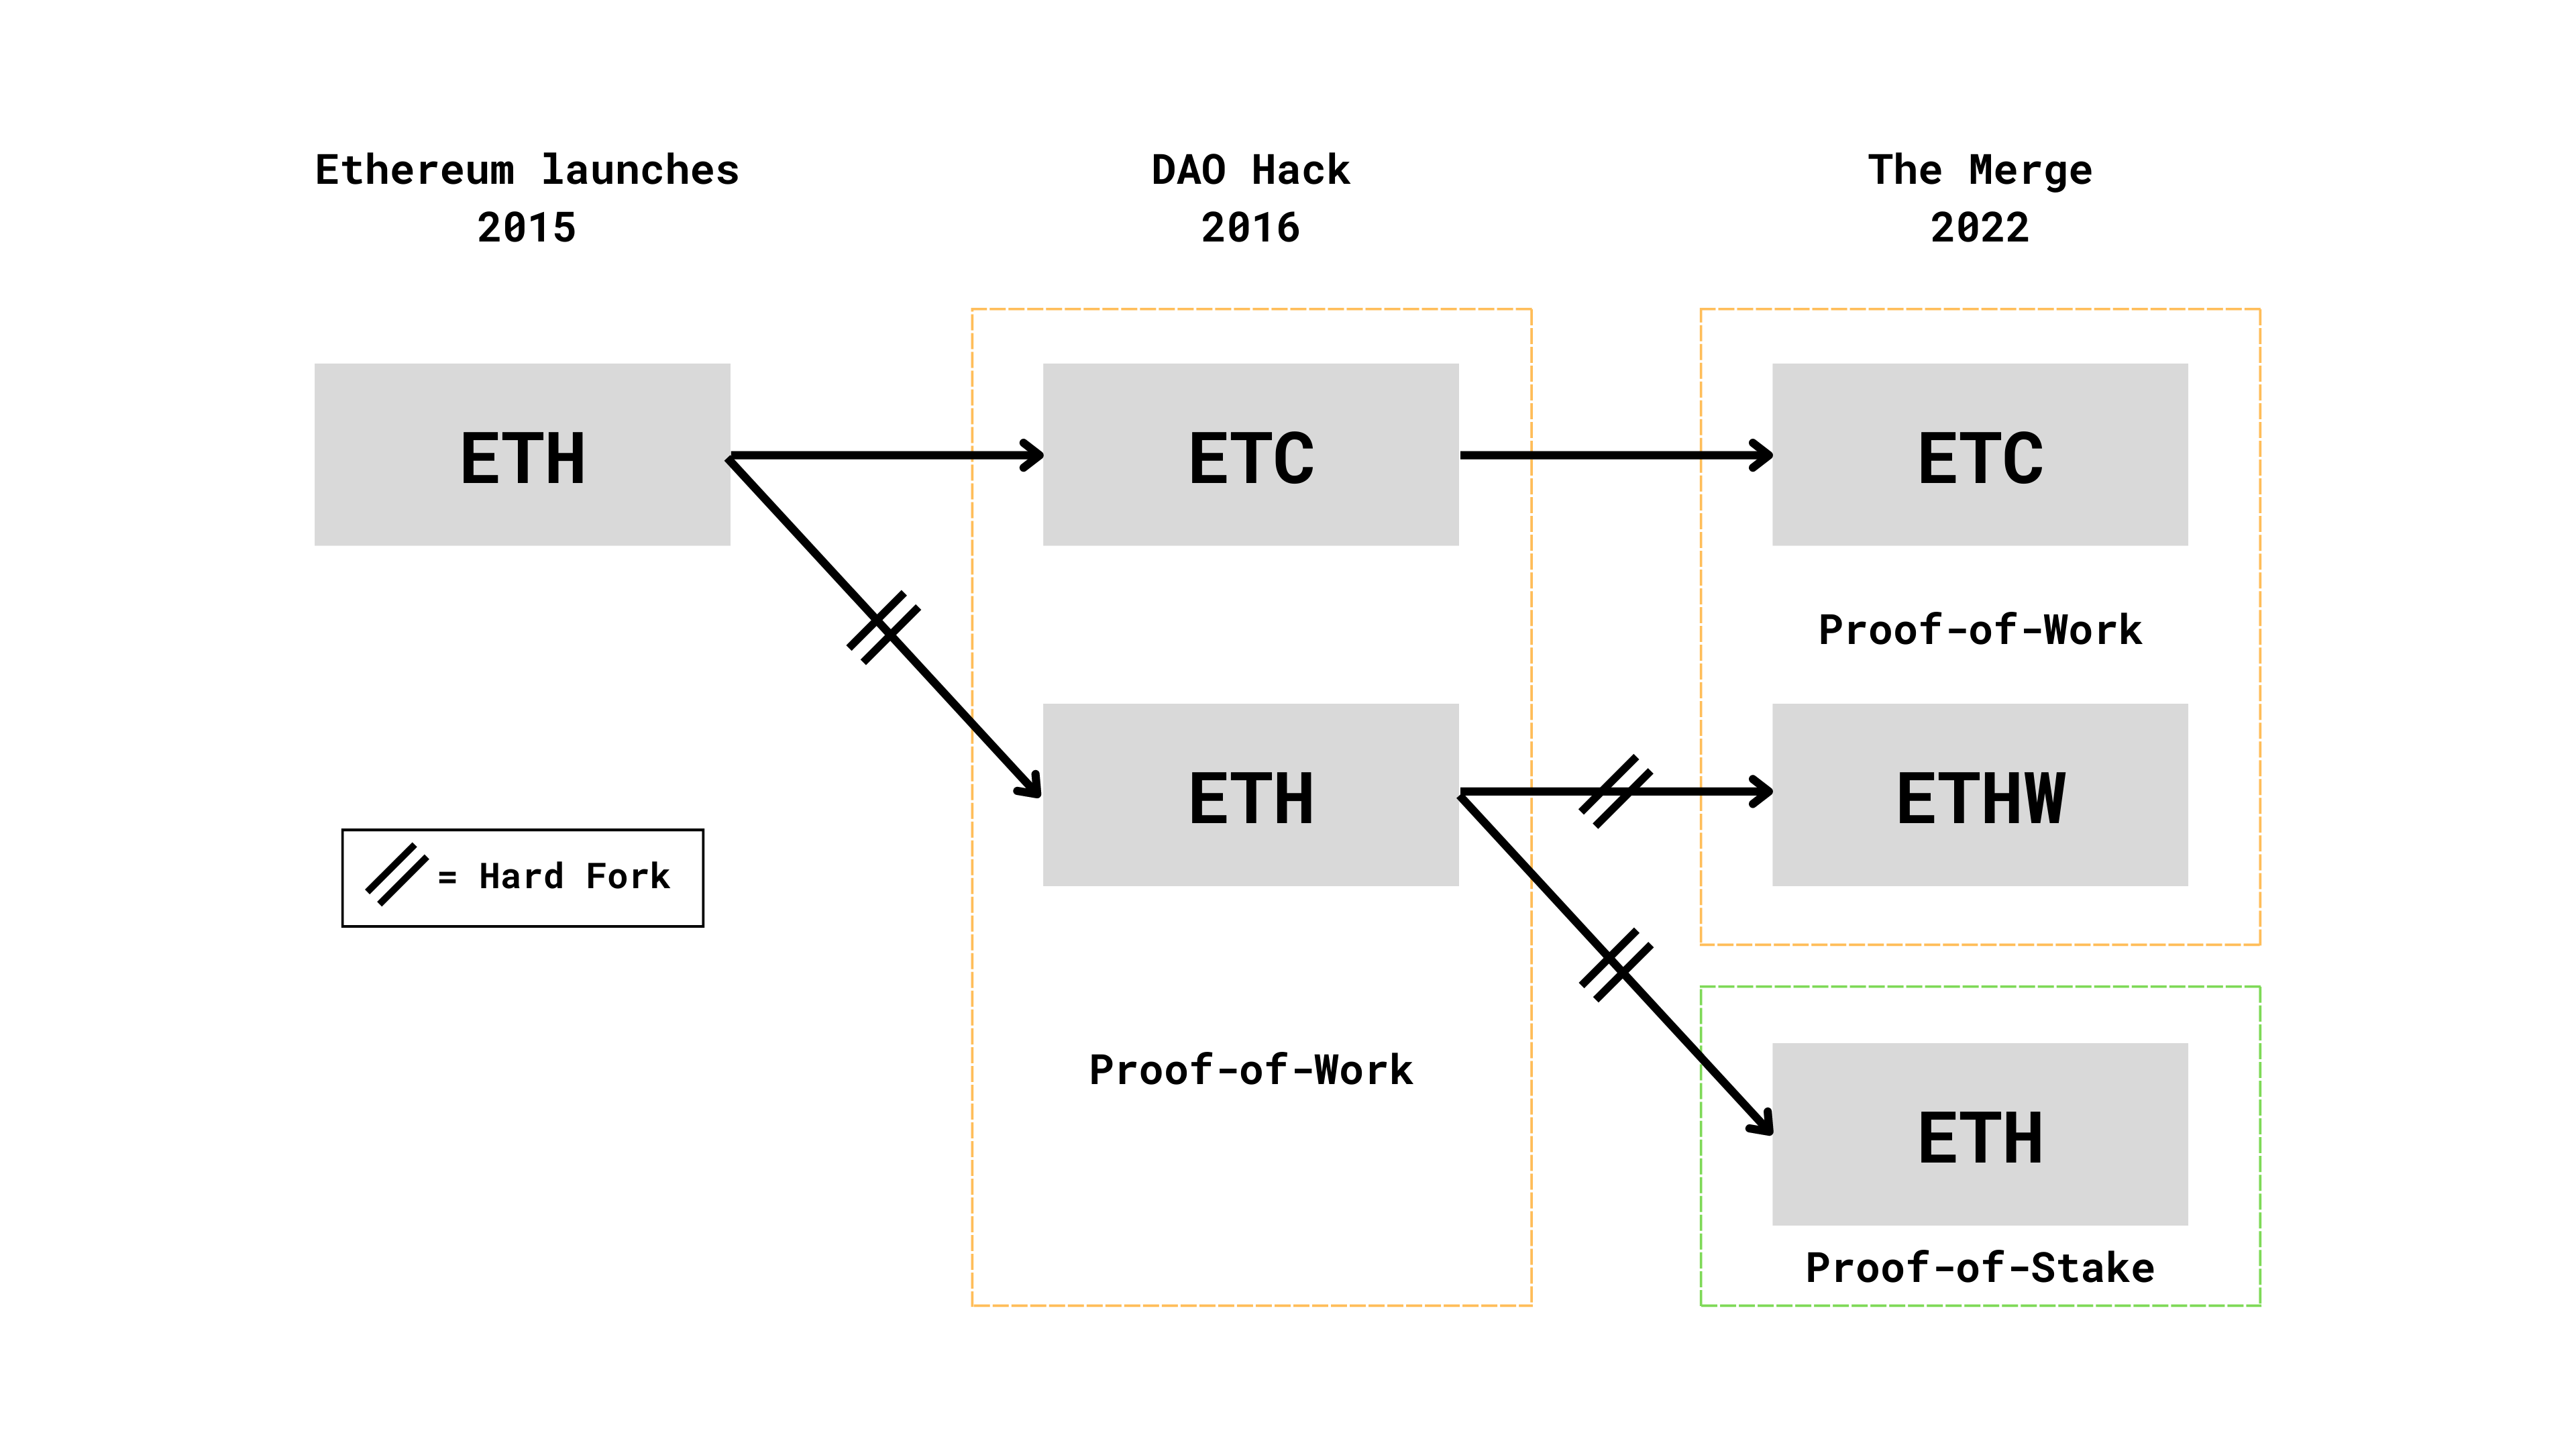 The history of the Ethereum network’s major forks and their consensus mechanisms